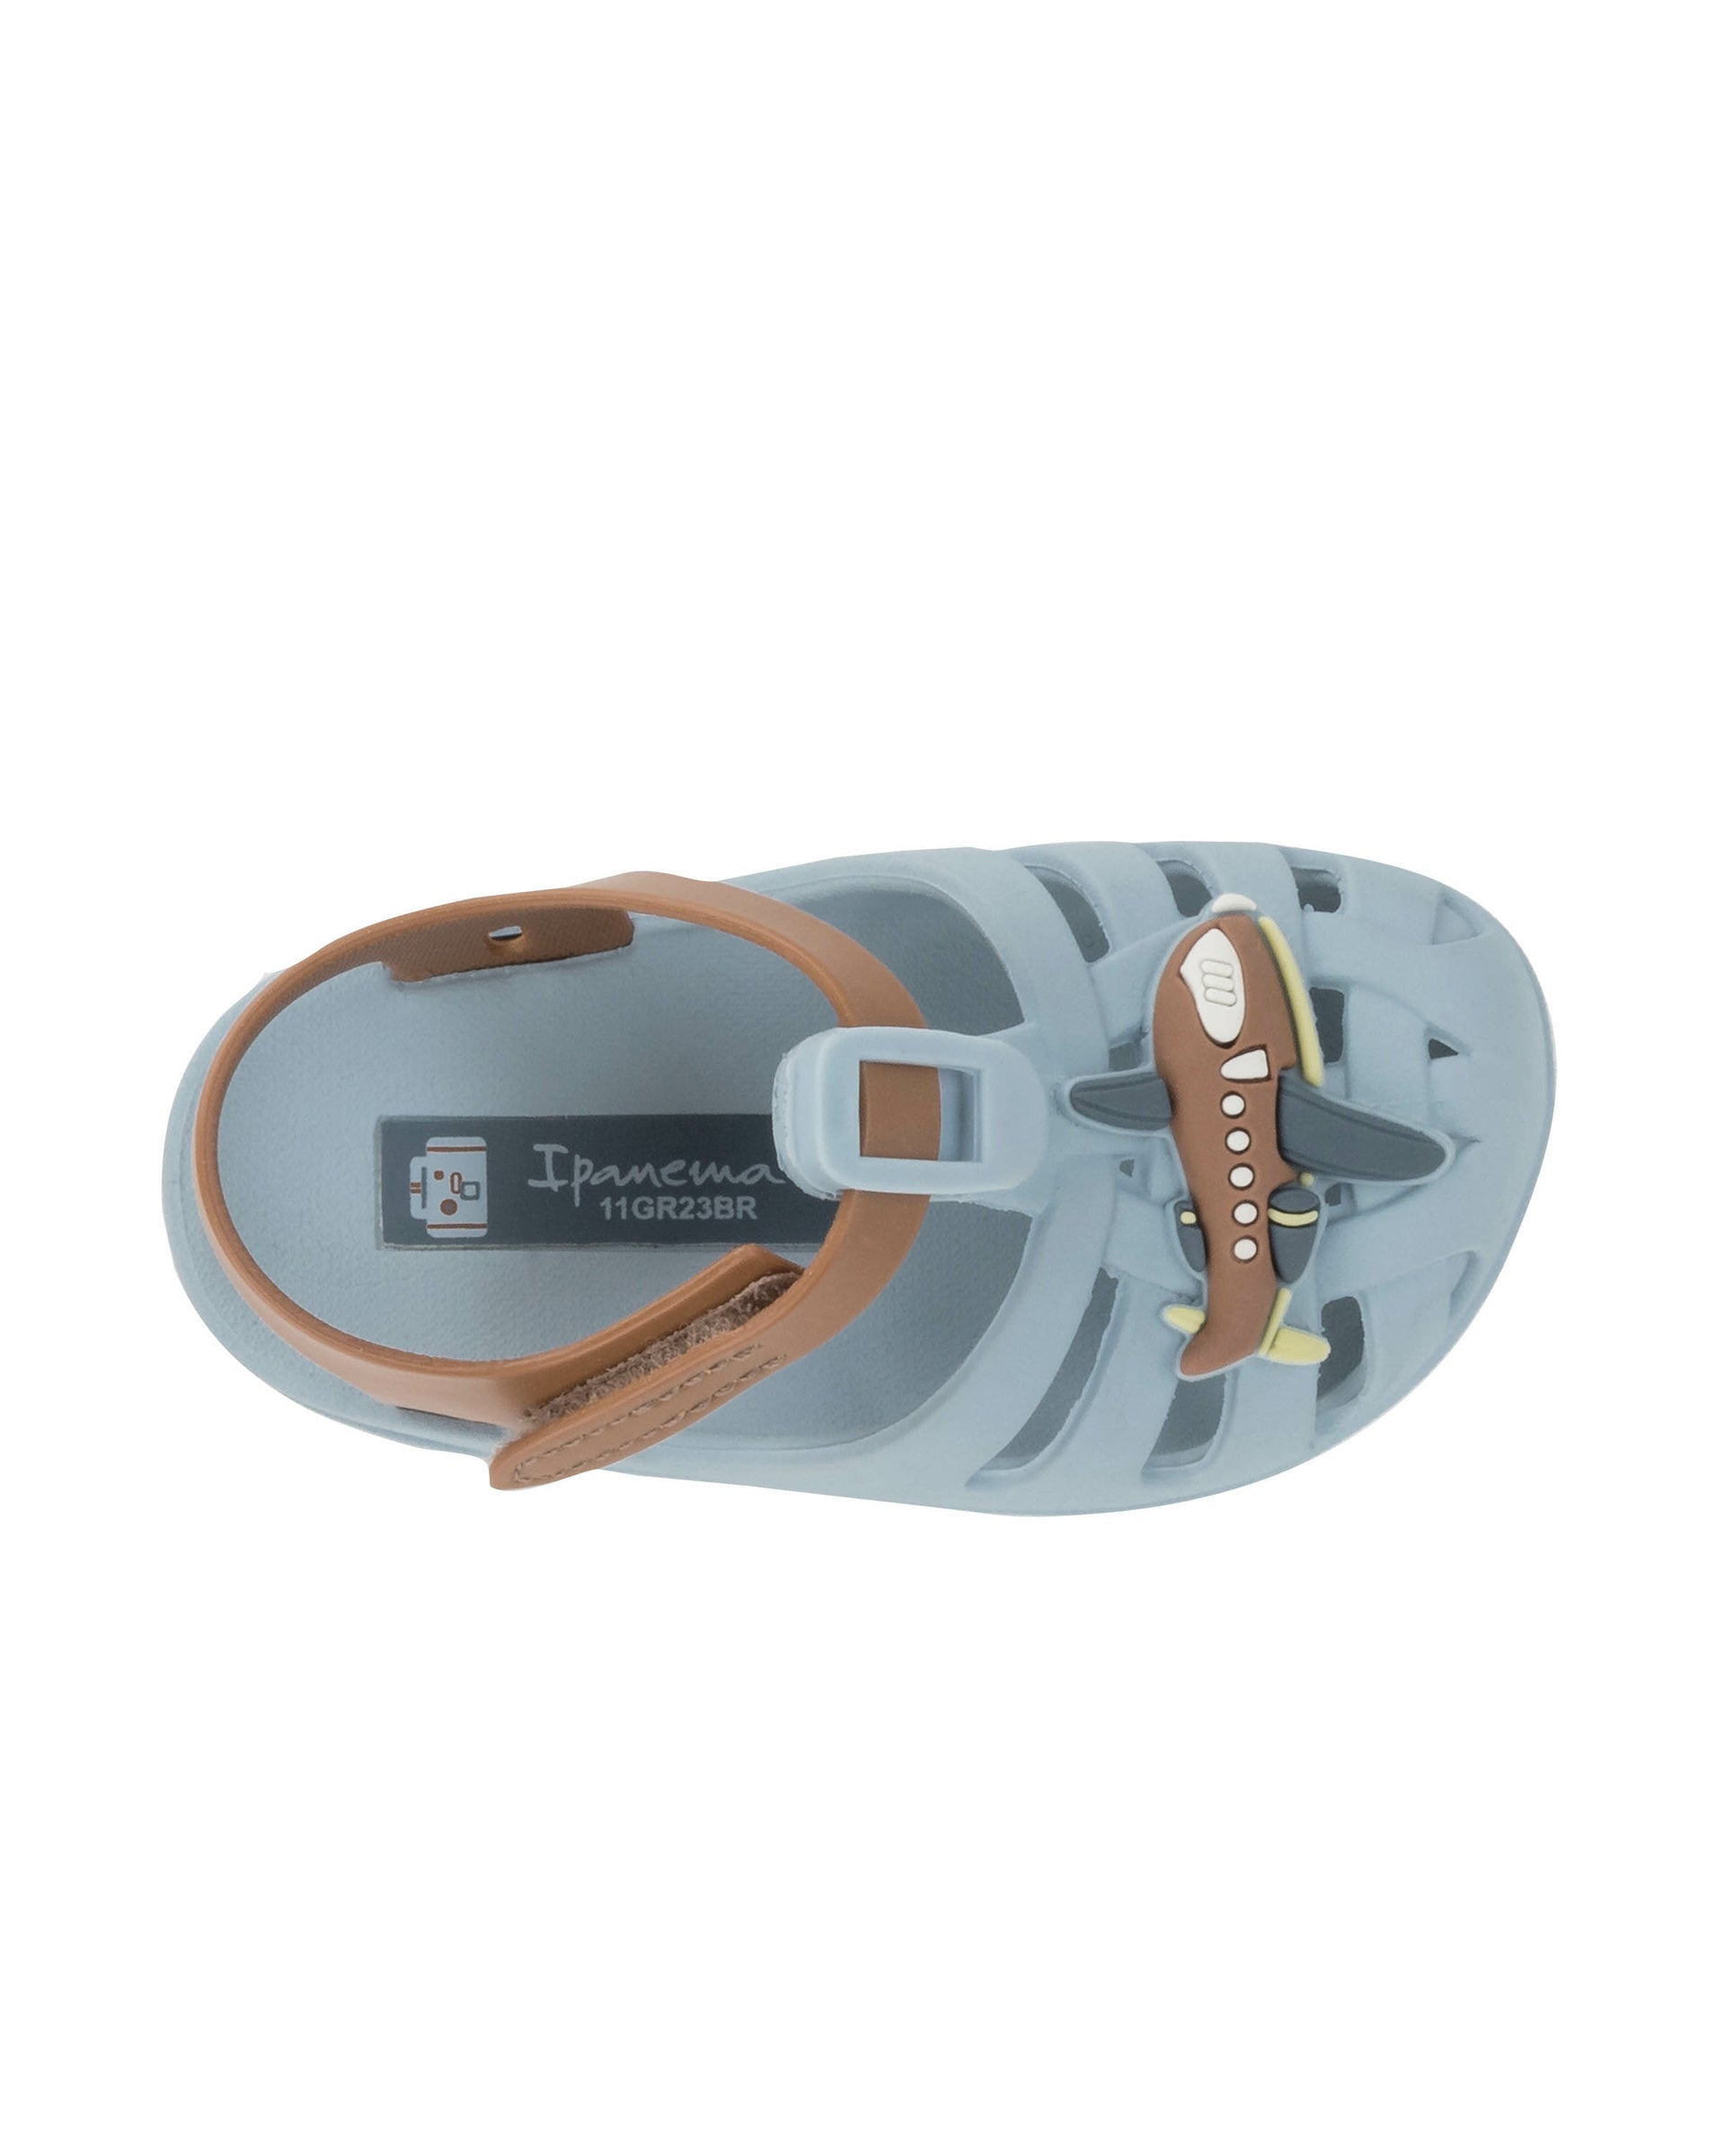 Top view of a blue Ipanema Summer baby sandal with airplane on the upper and a brown strap.